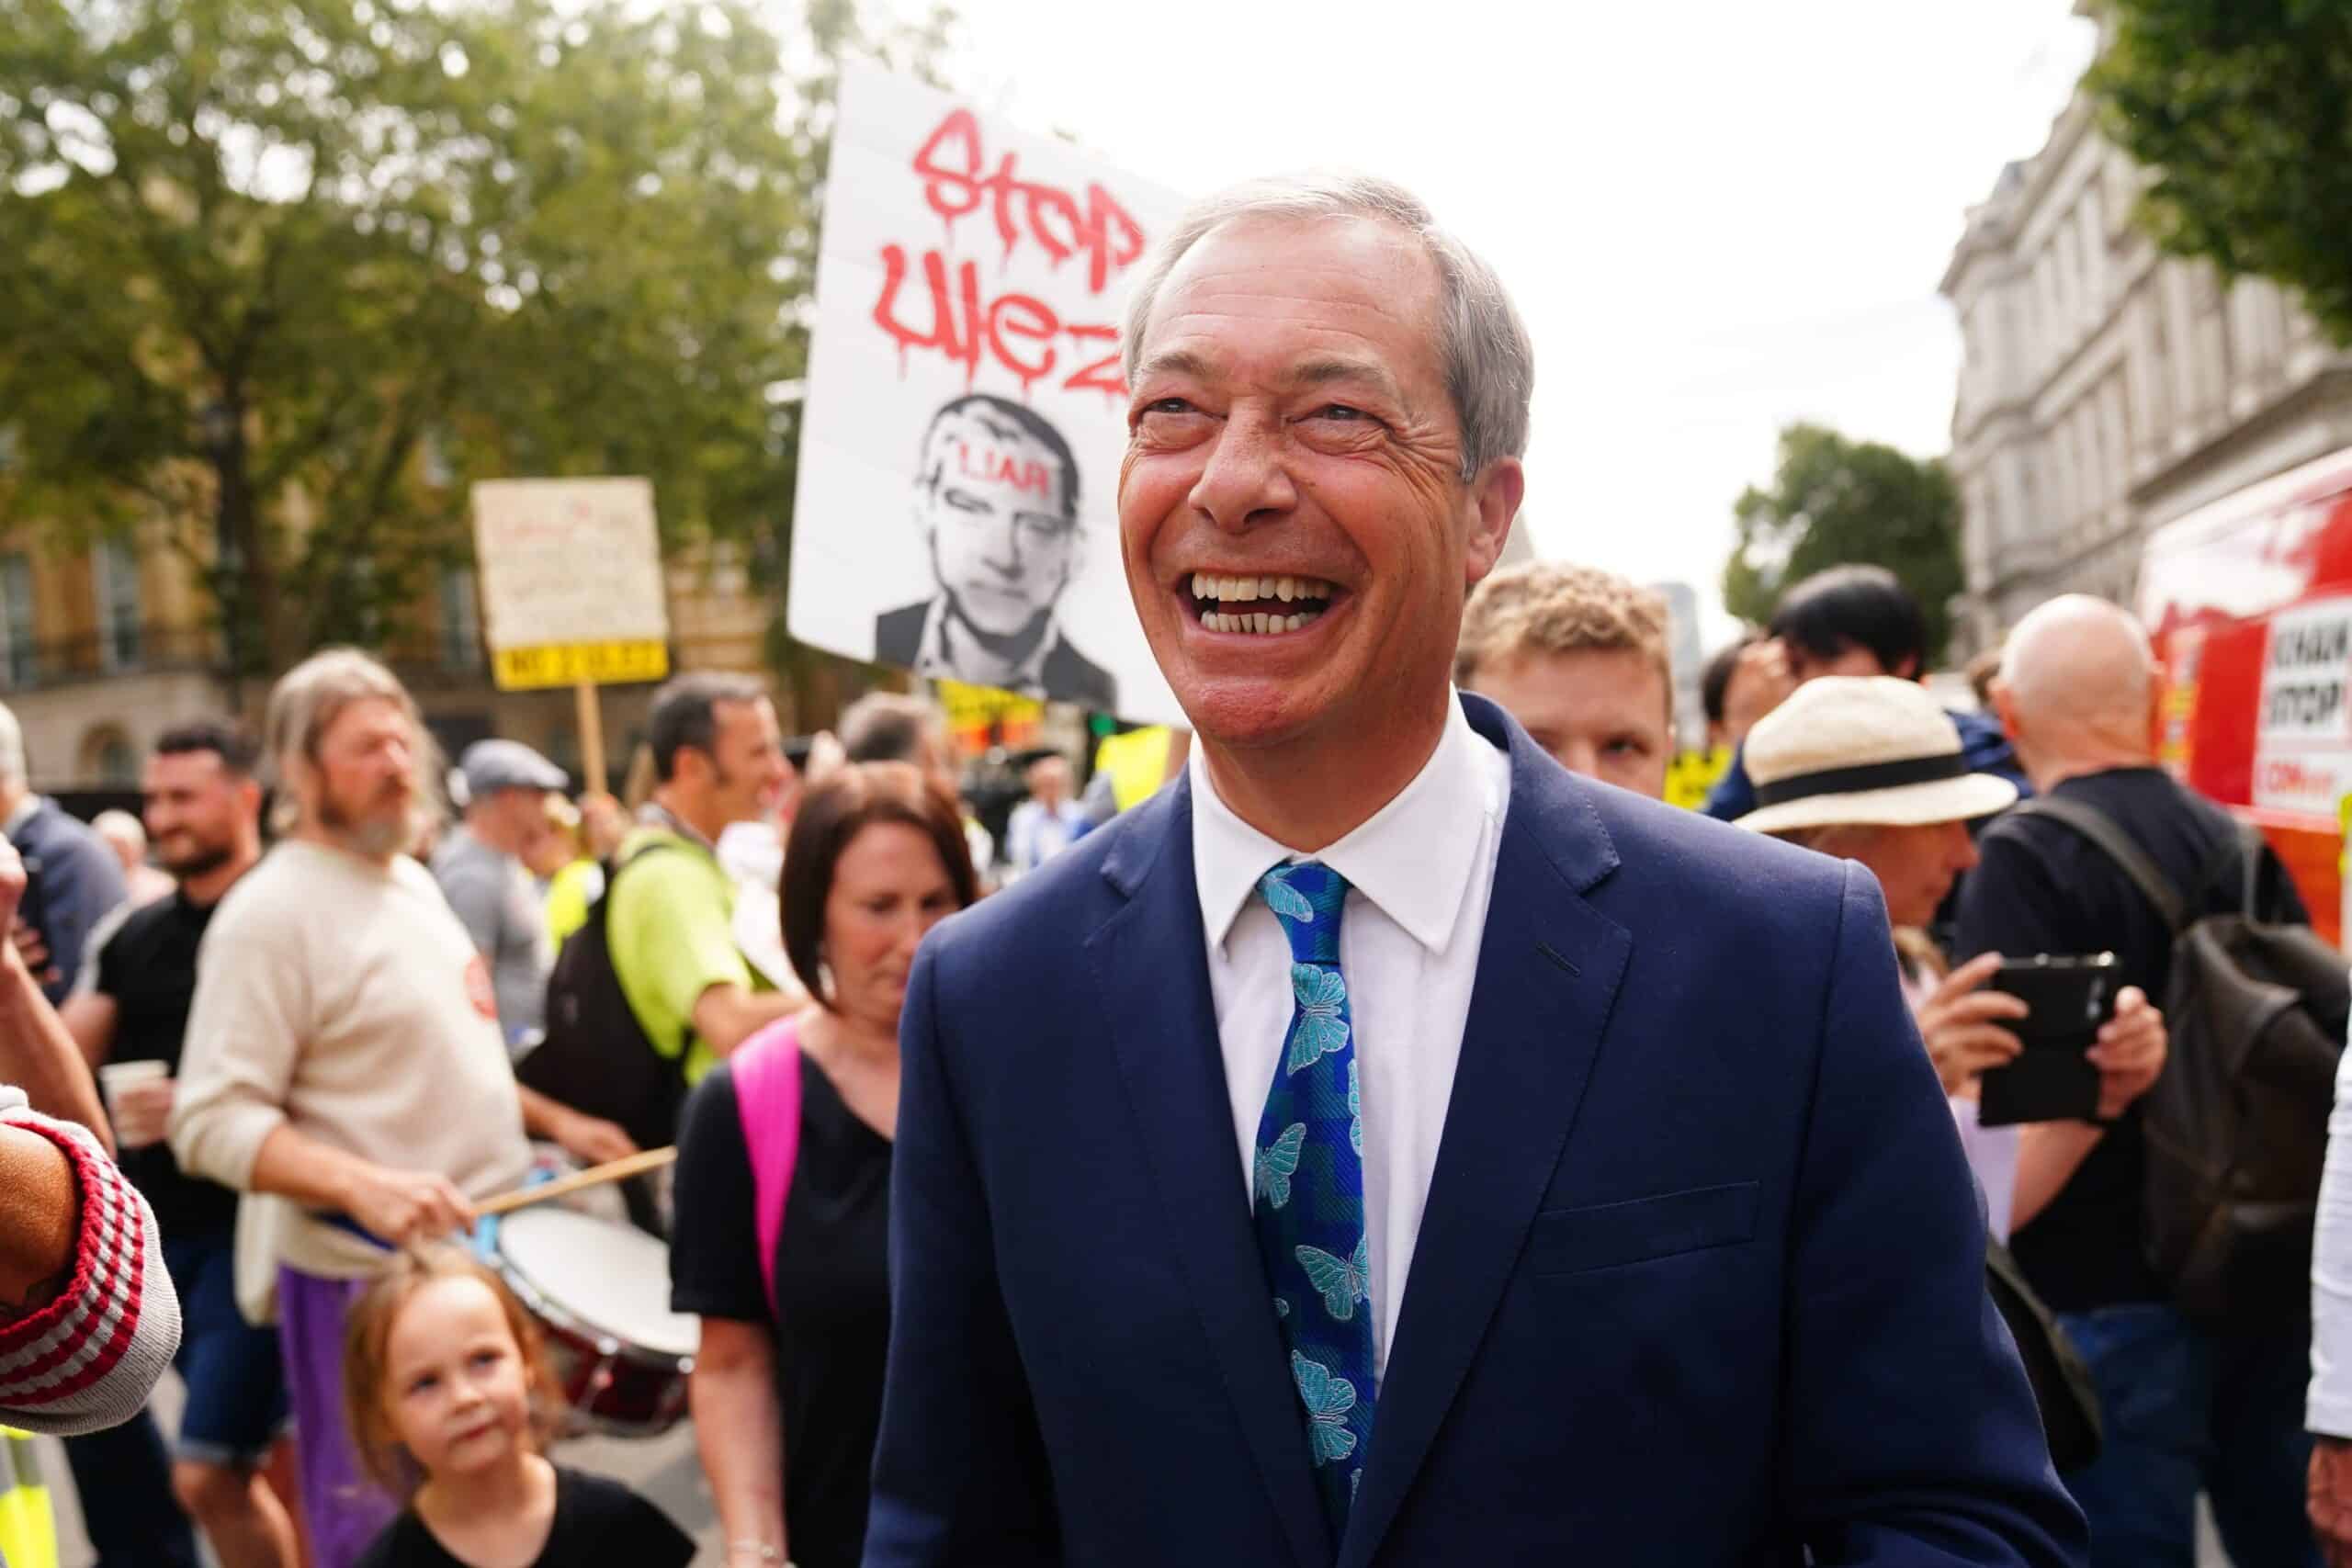 Nigel Farage ‘seriously considering’ going on I’m A Celeb